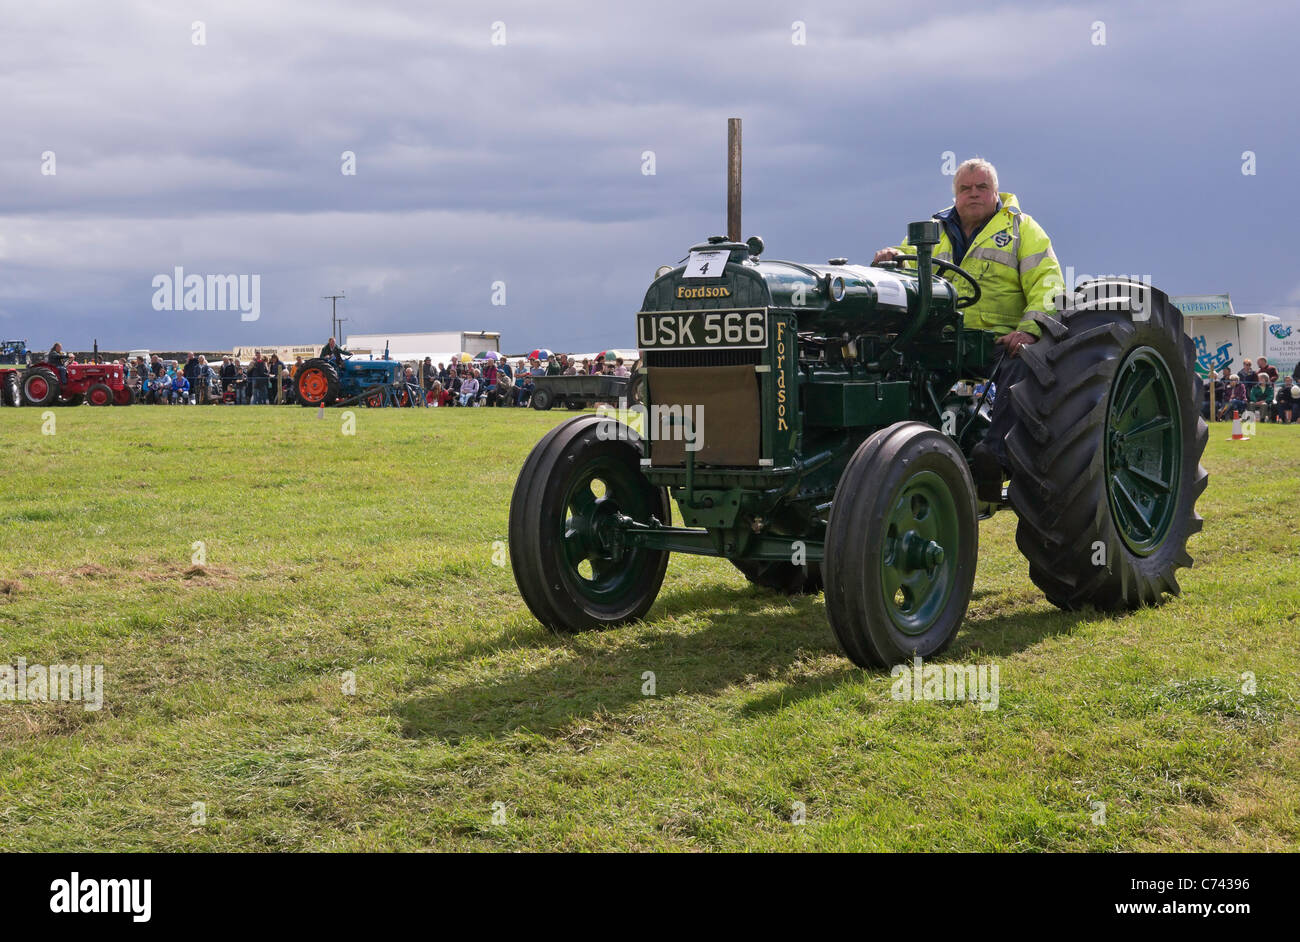 Fordson tractor in the parade ring at Wensleydale Agricultural Show, Leyburn, North Yorkshire. Stock Photo